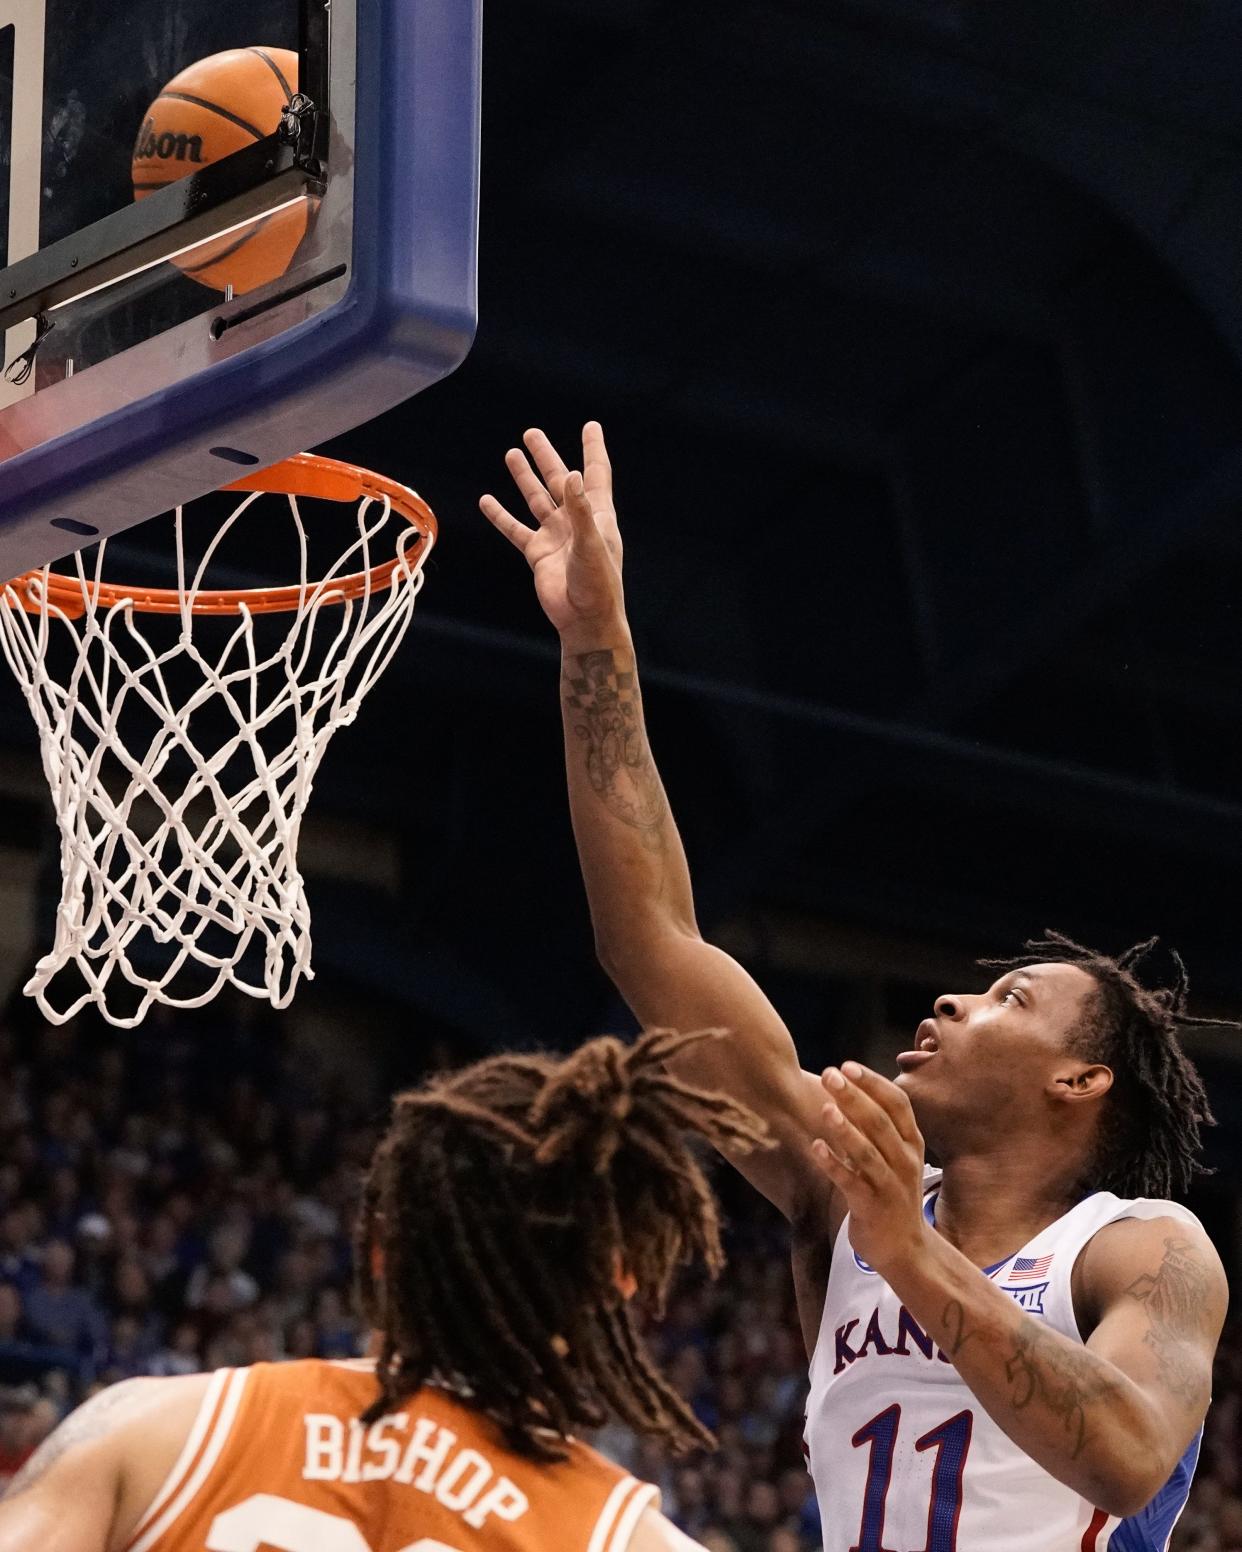 Freshman guard MJ Rice (11) lays in for two for Kansas against Texas during a game during the 2022-23 season inside Allen Fieldhouse.